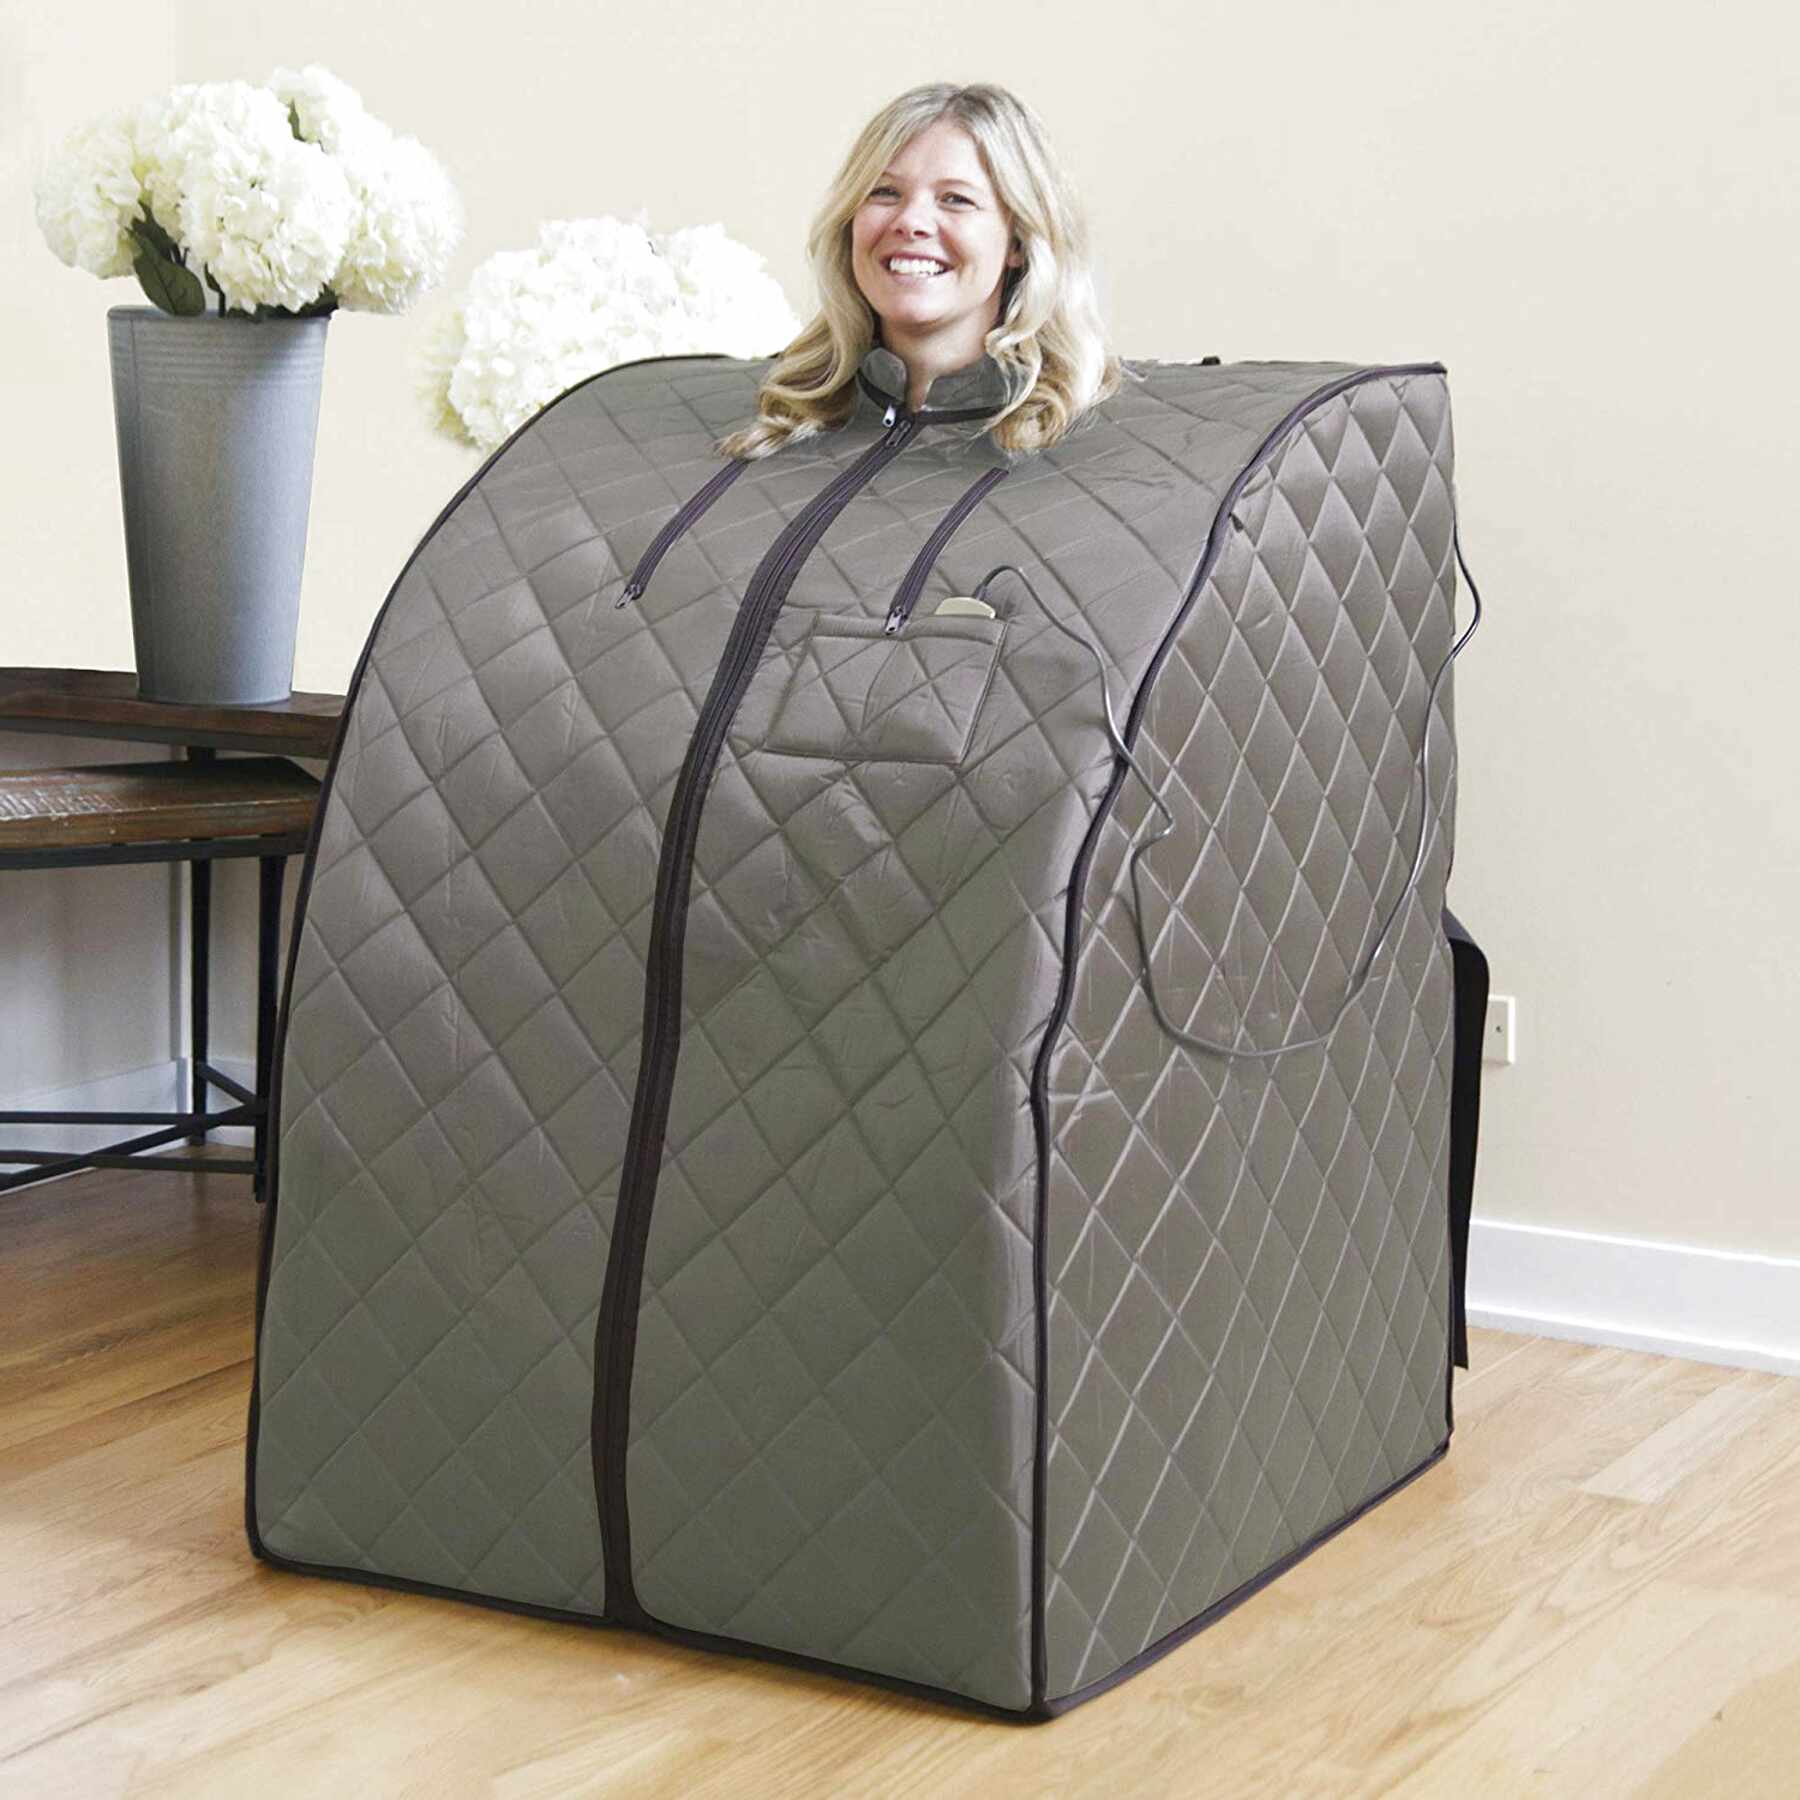 Portable Sauna for sale in UK | 67 used Portable Saunas